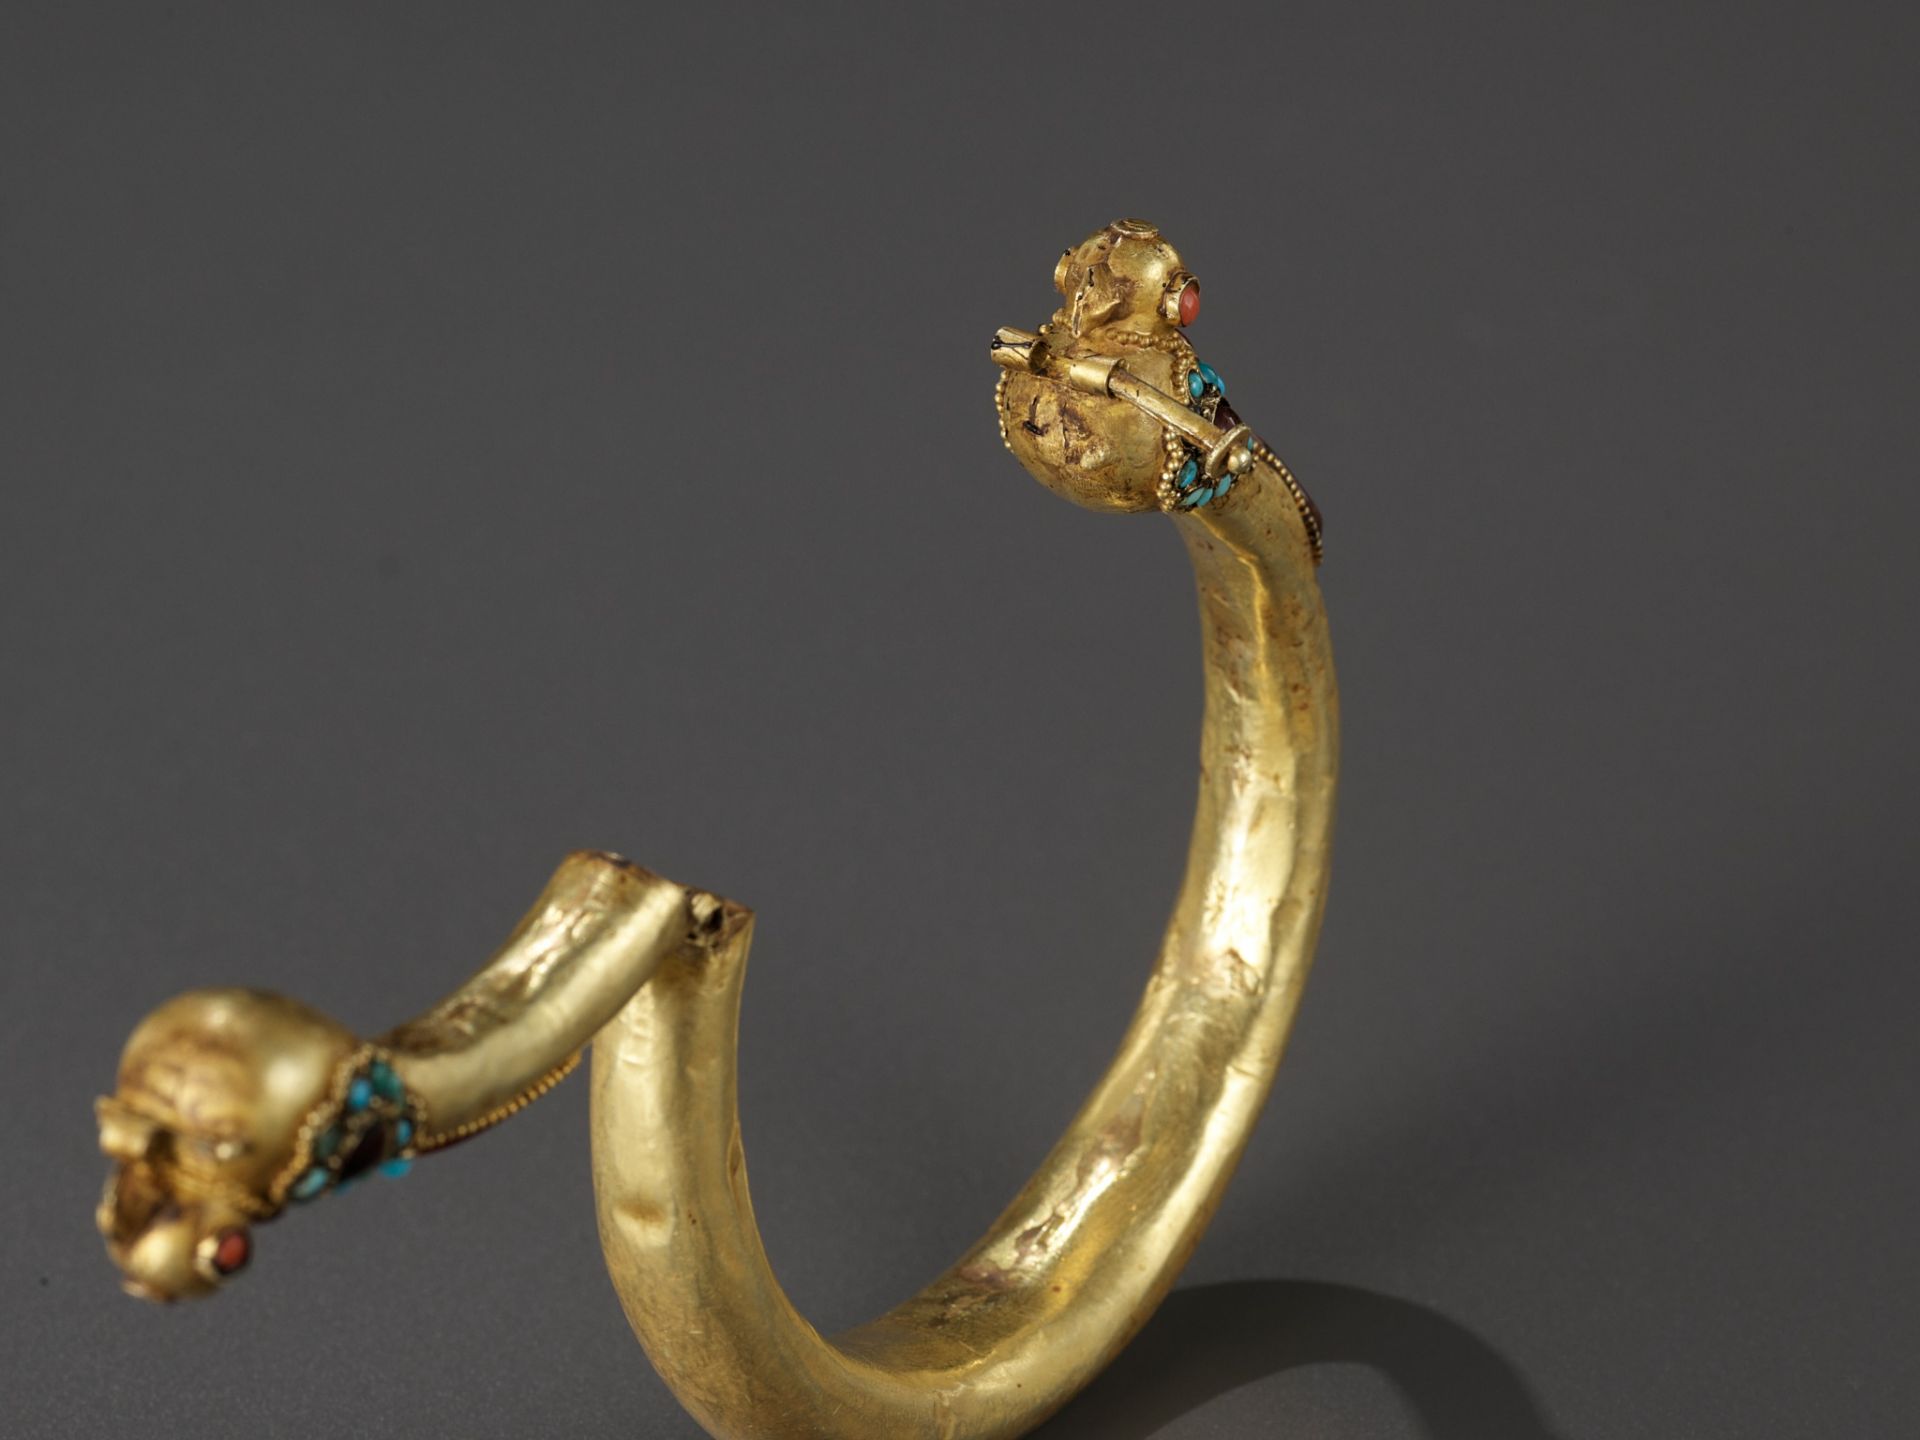 A PAIR OF GOLD 'BIRD' BANGLES, PERSIA, 11TH TO 12TH CENTURY - Image 6 of 9